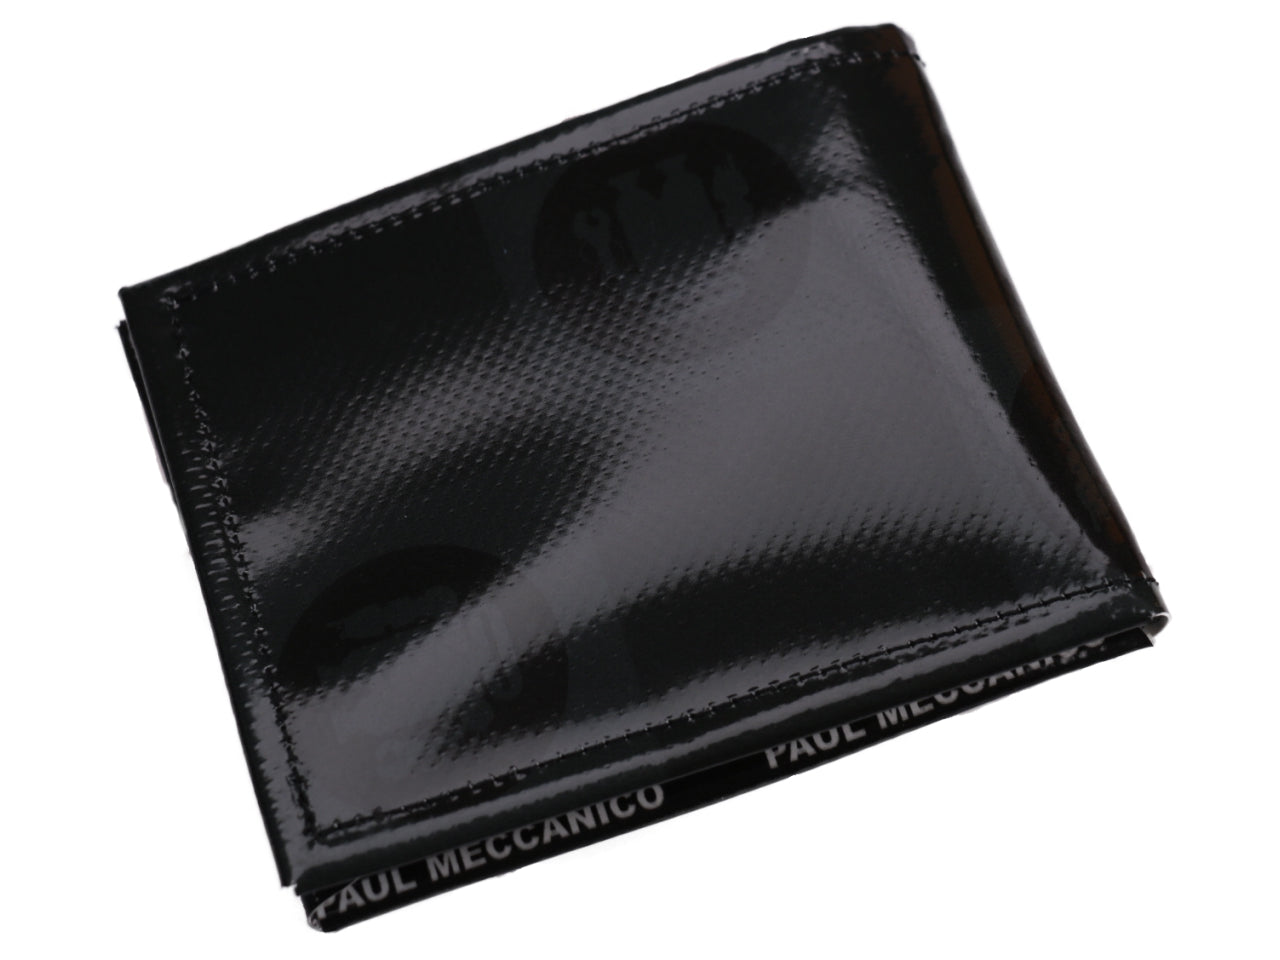 MEN'S WALLET DARK GREEN WITH CHESS FANTASY. MODEL CRIK MADE OF LORRY TARPAULIN. - Limited Edition Paul Meccanico